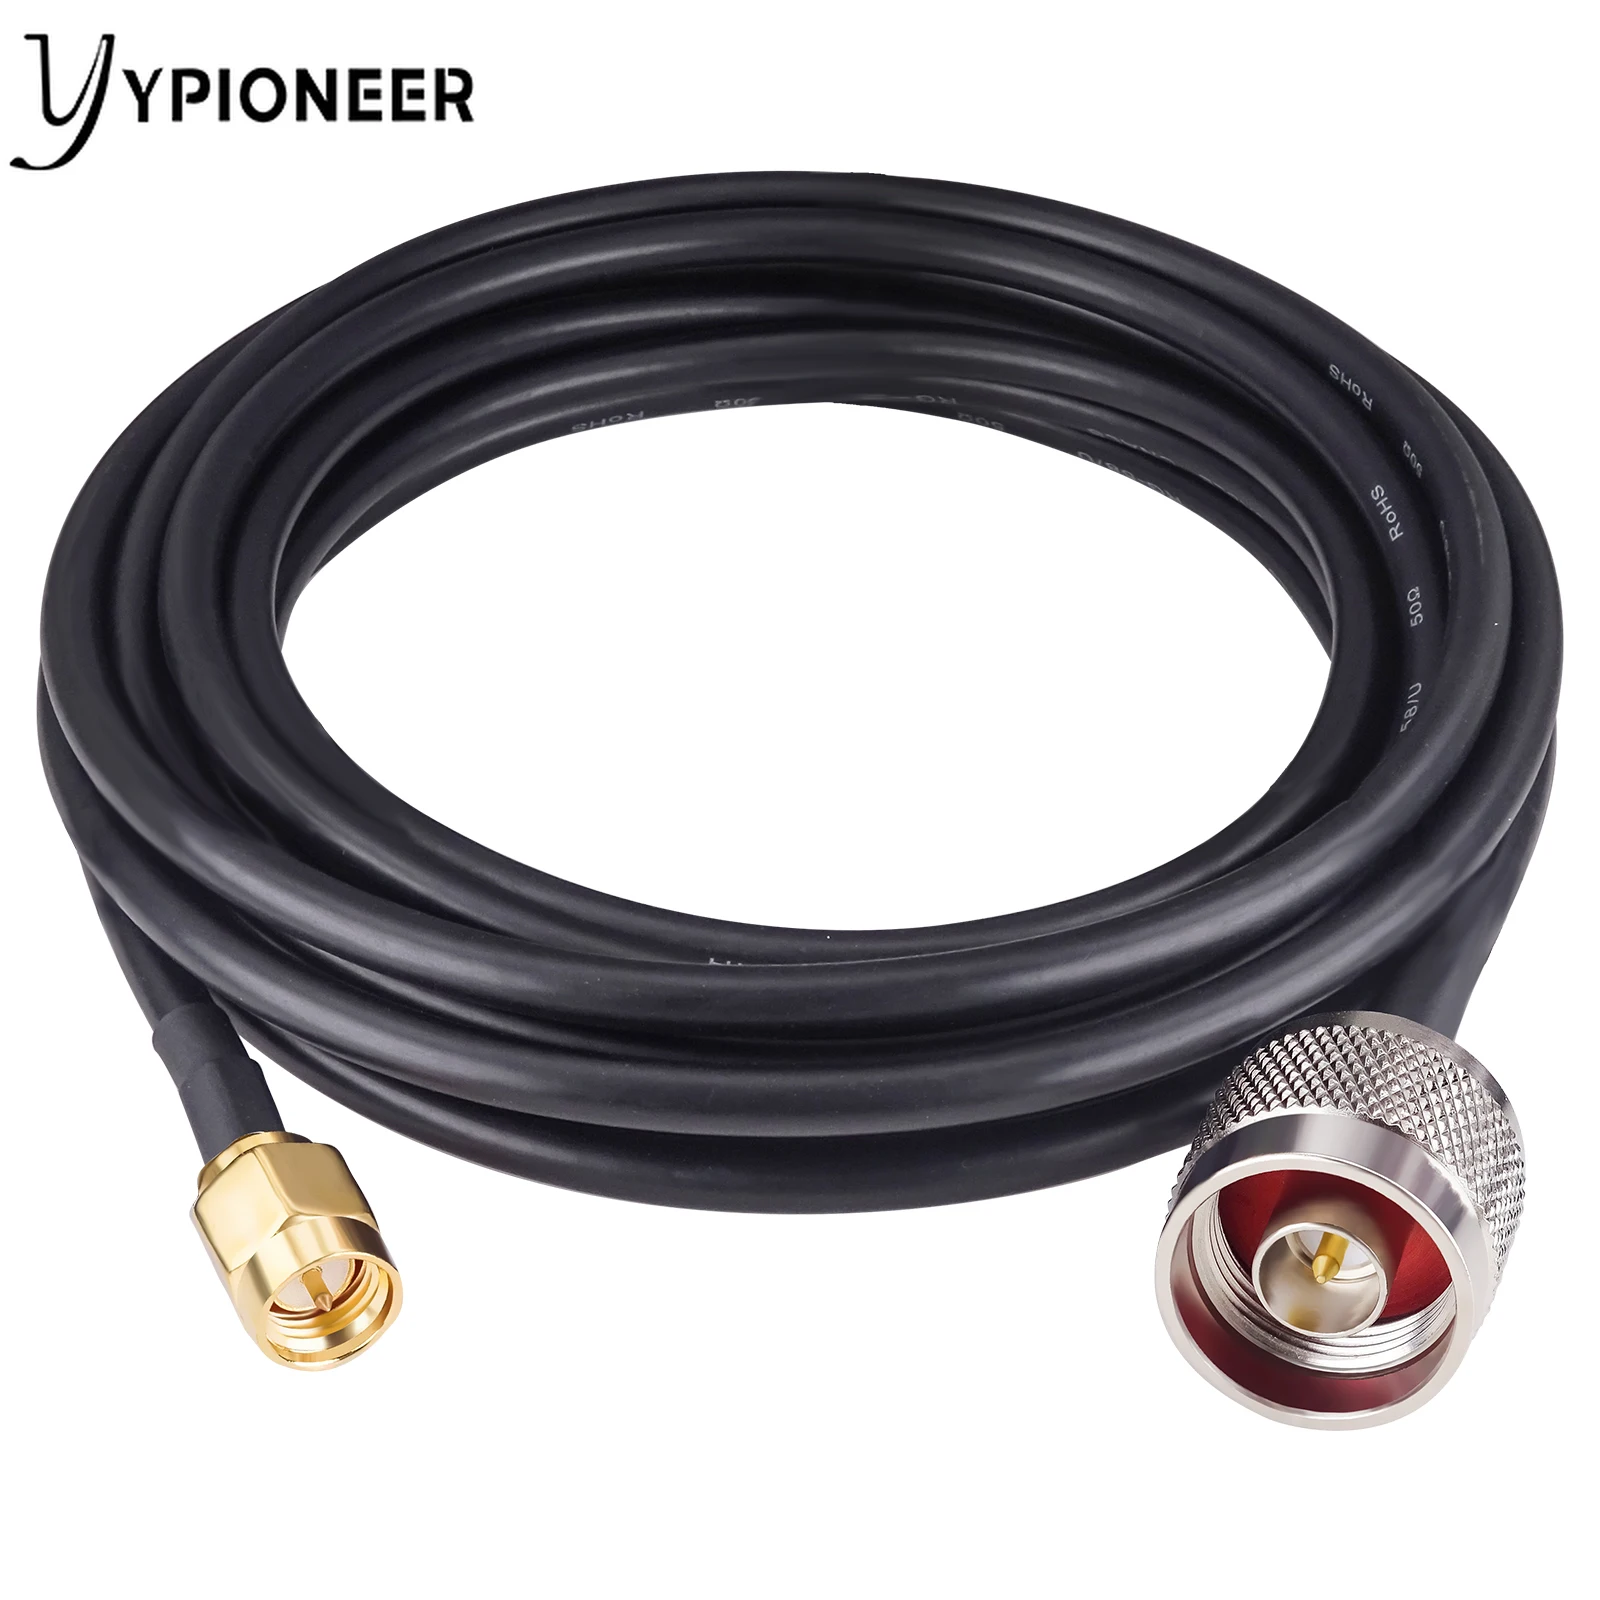 YPioneer T10006 Low Loss Coaxial RG58 Extension Cable N Male to SMA Male Coax Wire for 3G/4G/5G/LTE/ADS-B/Ham/GPS/WiFi/RF Radio